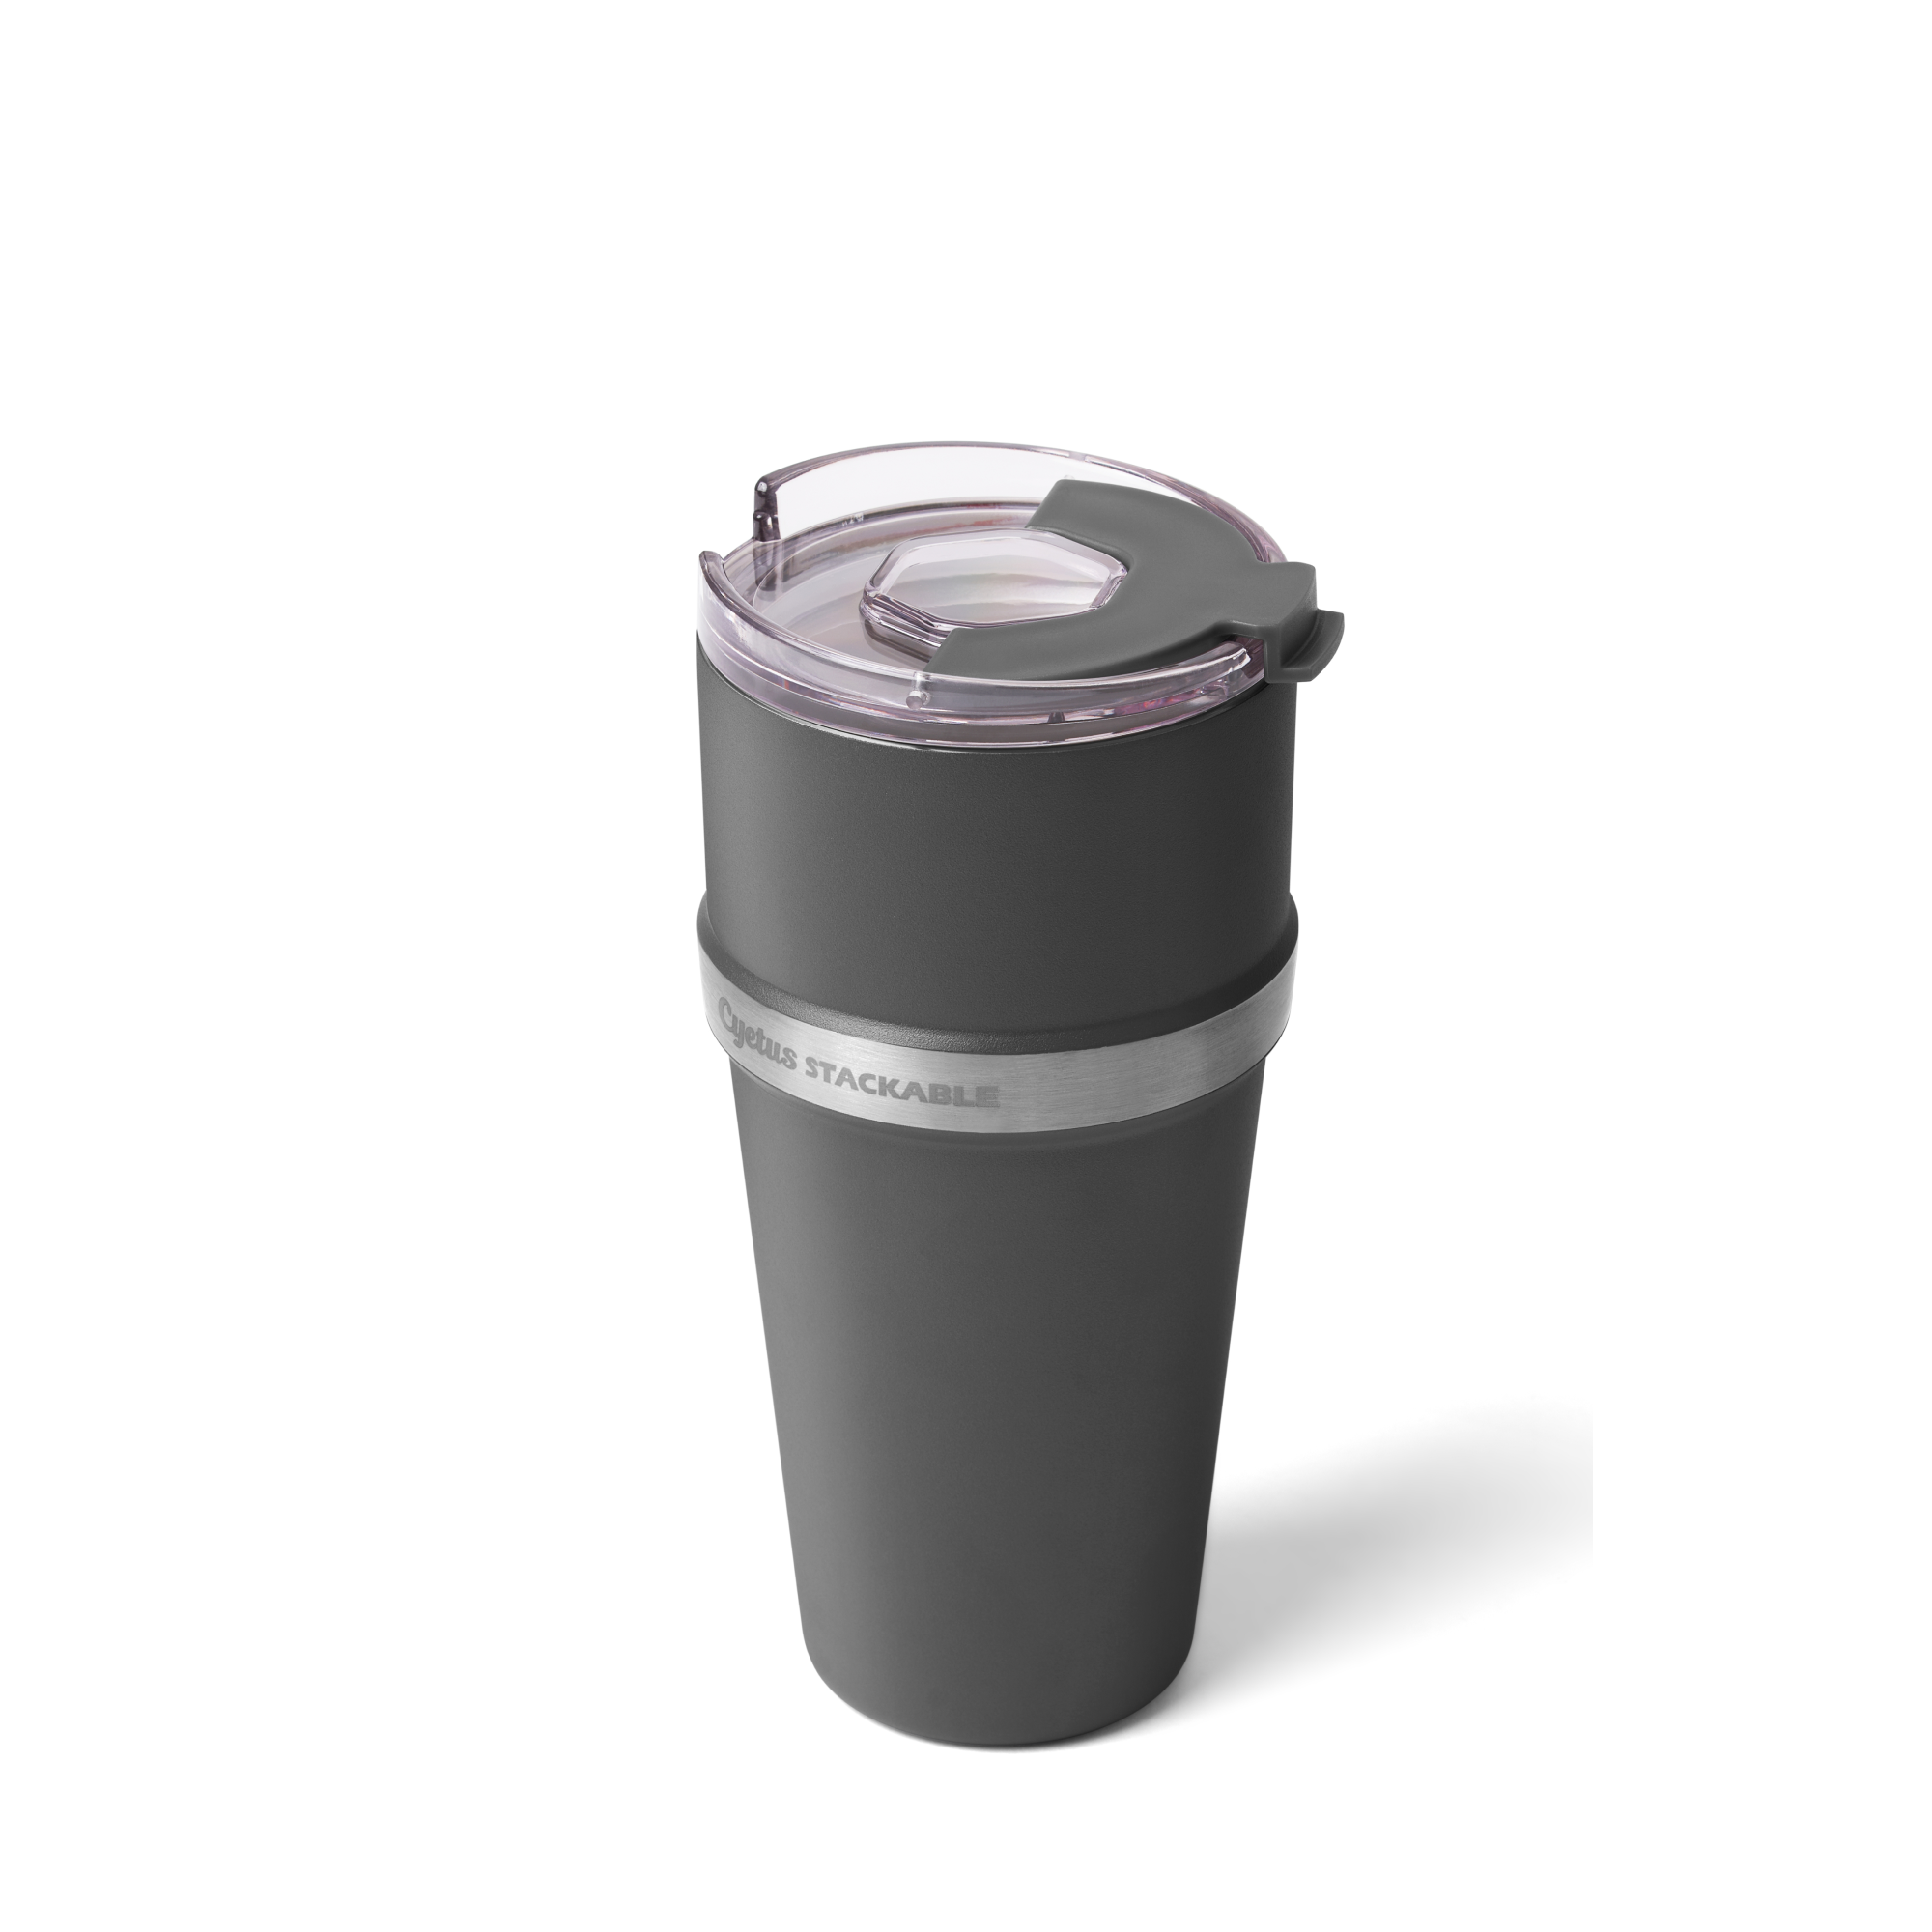 Cyetus Stackable Tumbler - Me Time Never Tasted So Good